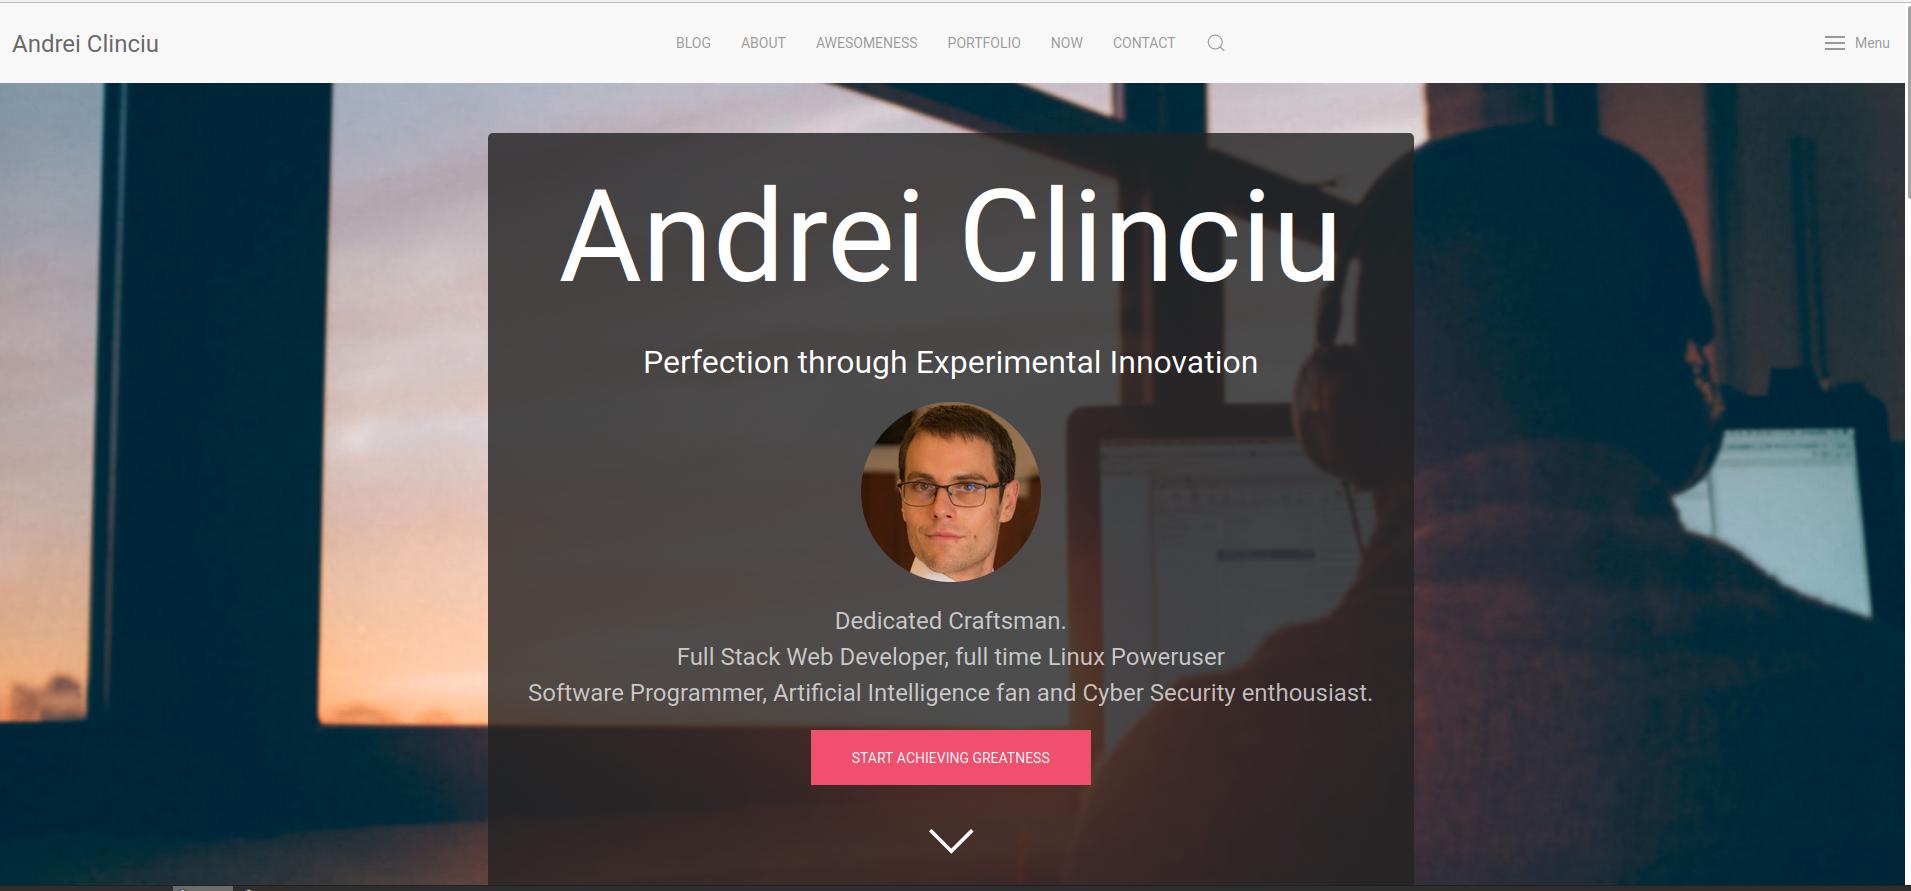 Previous Version of Andreiclinciu.net